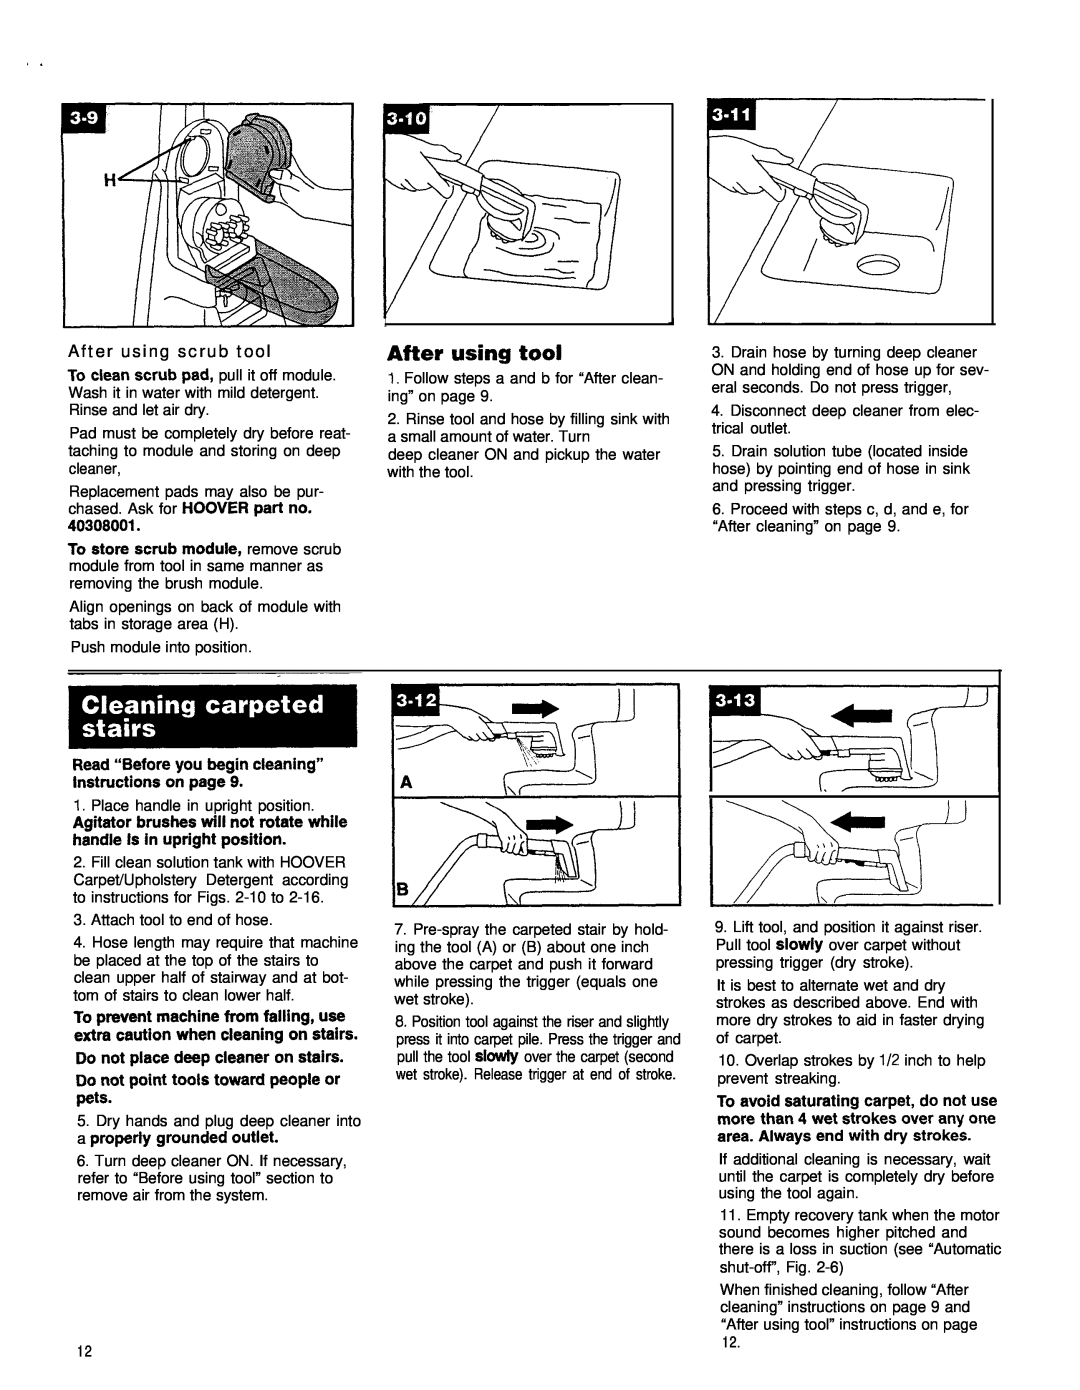 Hoover SteamVac" LS manual After using tool, After using scrub tool, Read “Before you begin cleaning” Instructions on page 